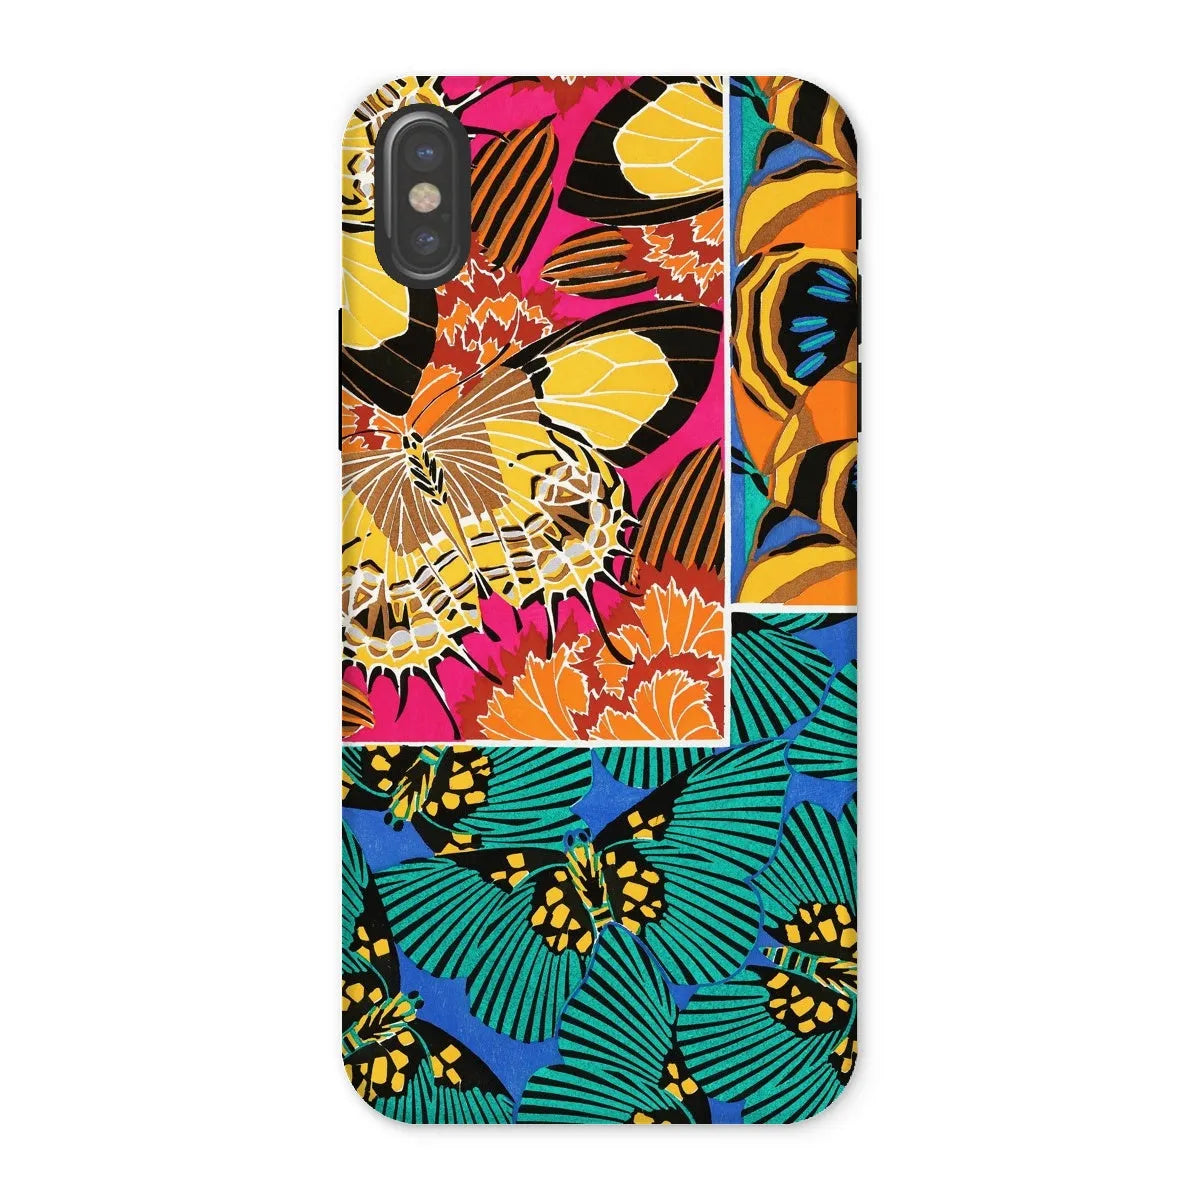 Rainbow Butterfly Aesthetic Art Phone Case - E.a. Seguy - Iphone x / Matte - Mobile Phone Cases - Aesthetic Art